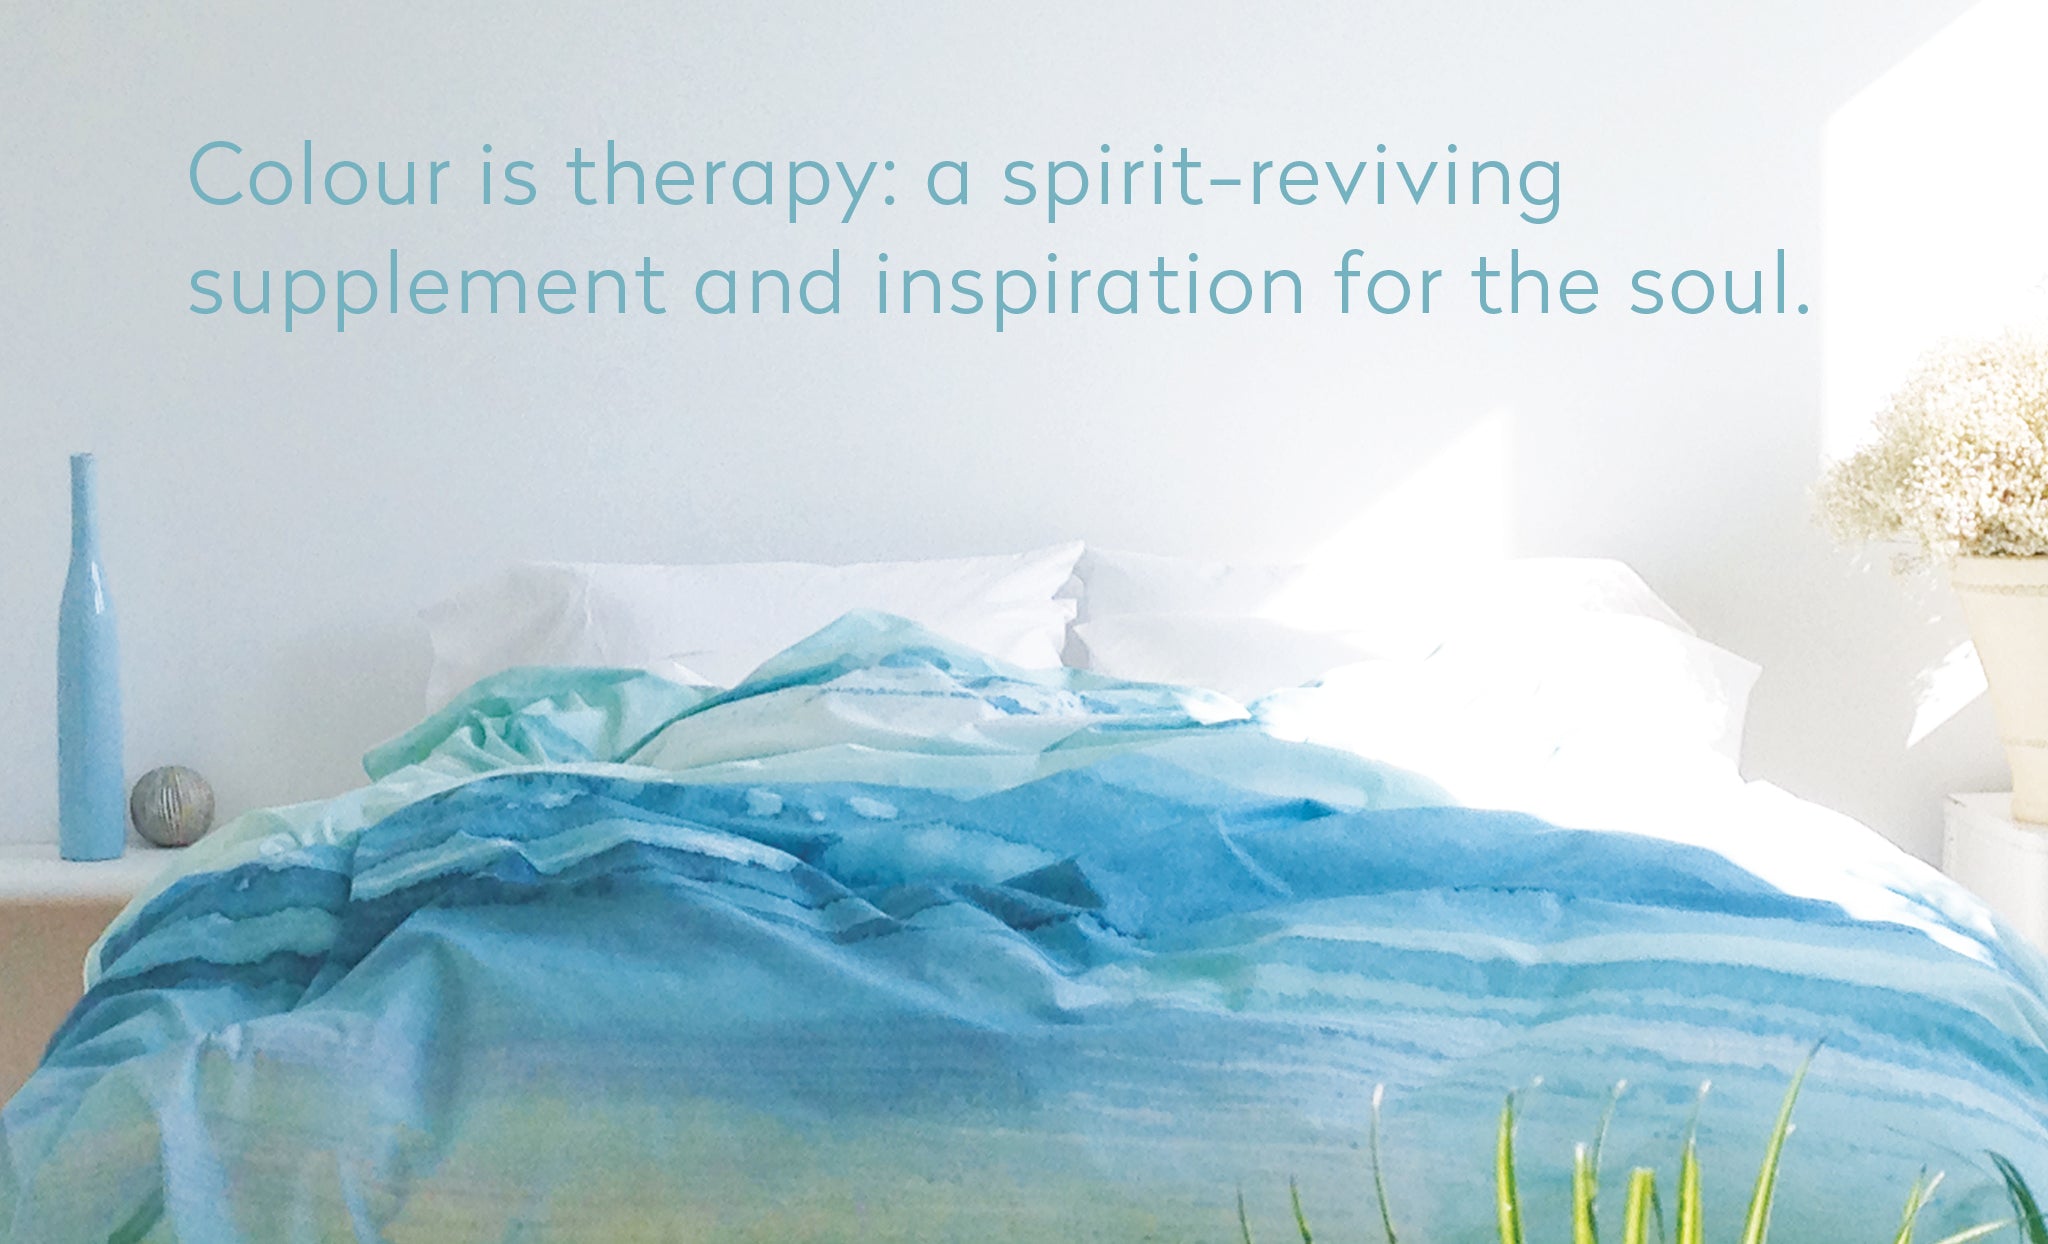 Colour is therapy - inspiration for the soul on image of Paradisus duvet cover in bedroom